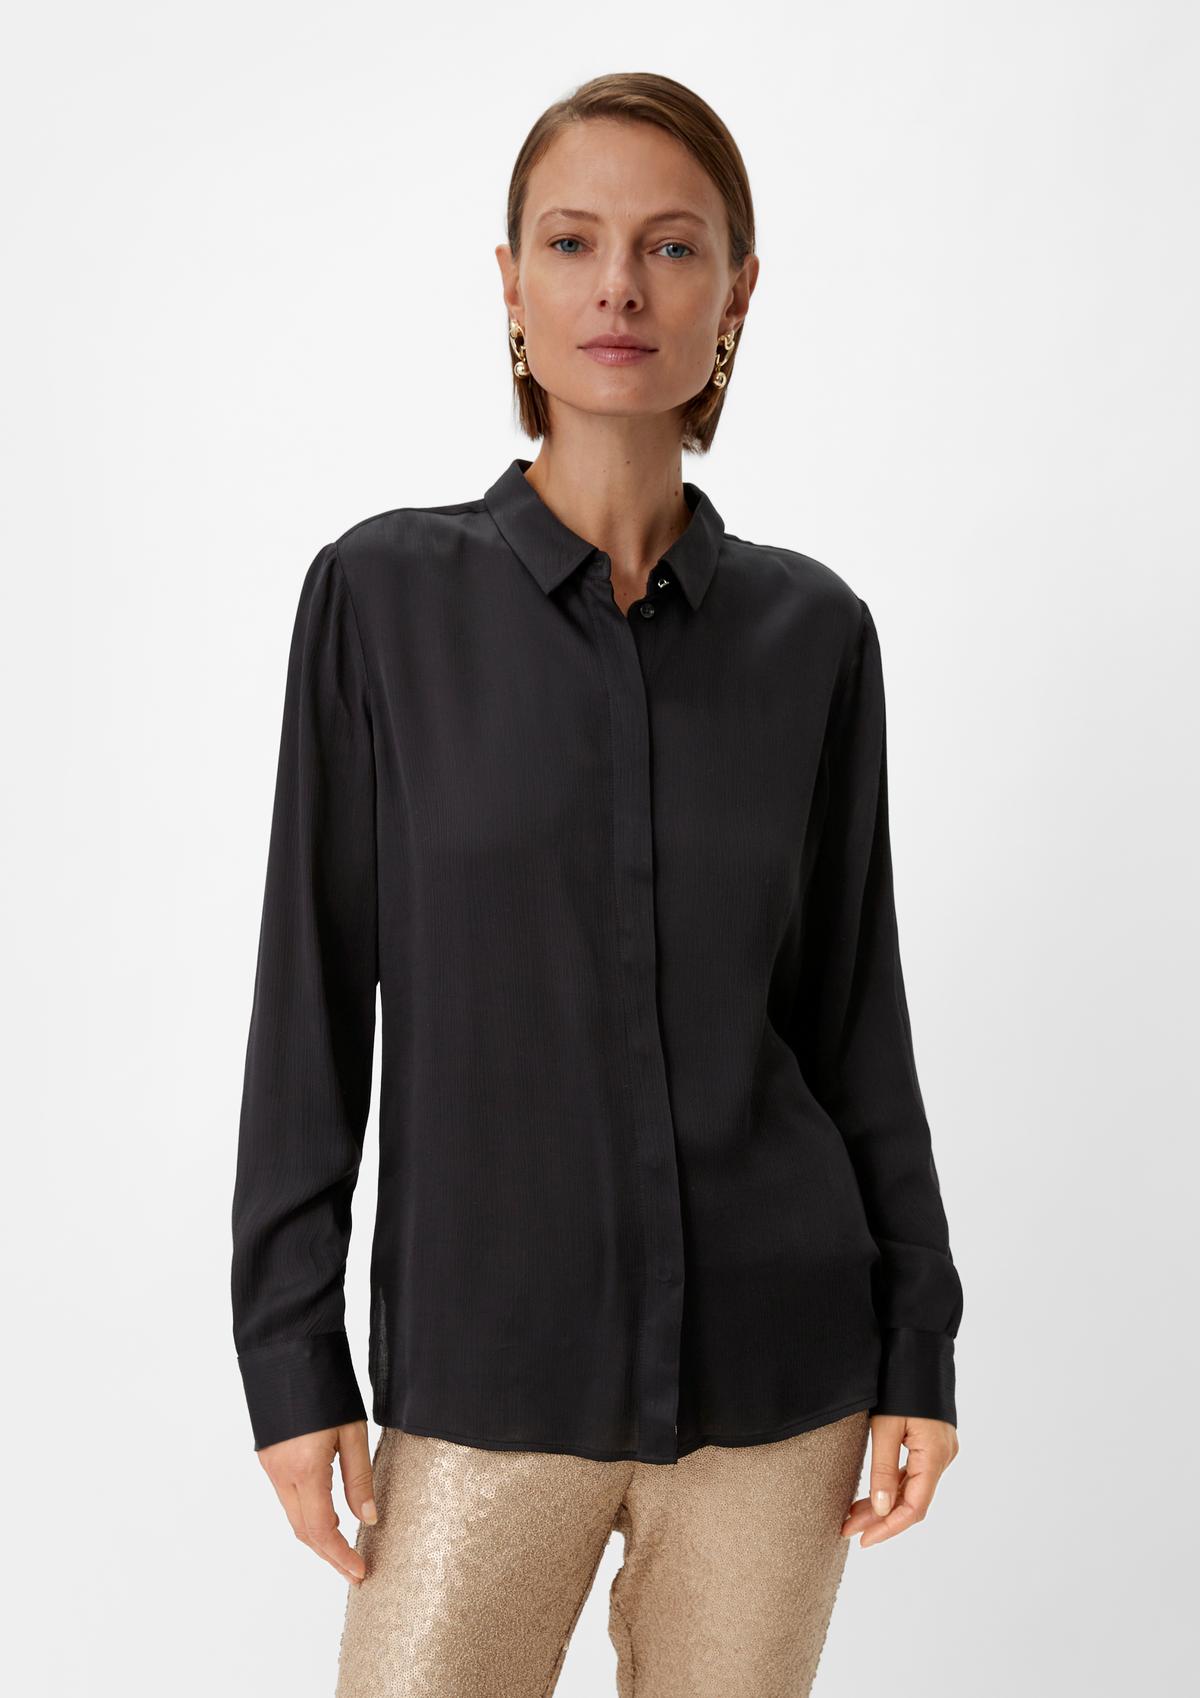 Satin blouse with a crinkle texture